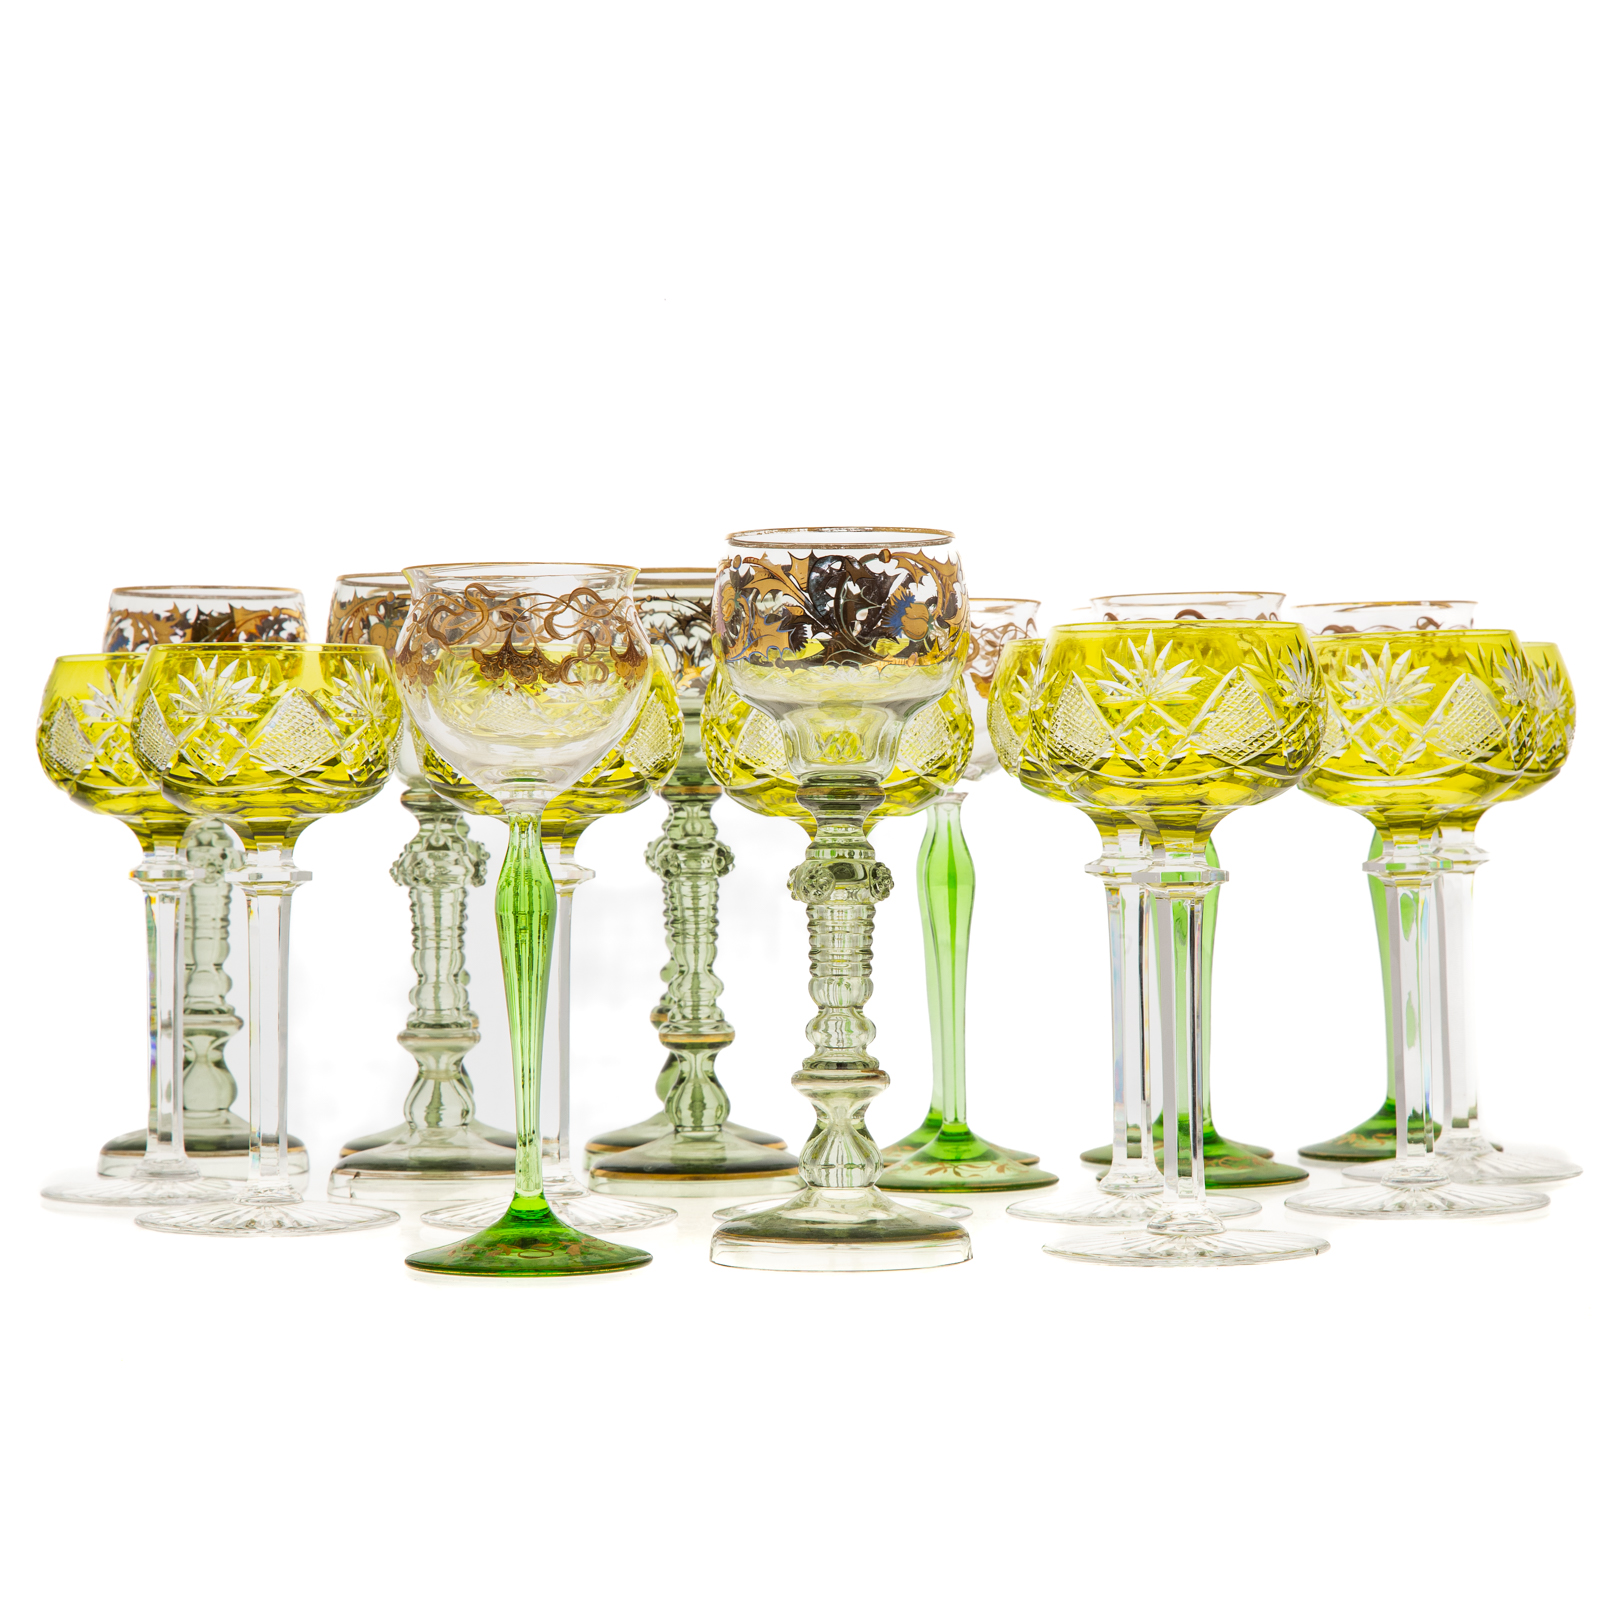 20 ASSORTED WINE STEMS Includes  3388cb